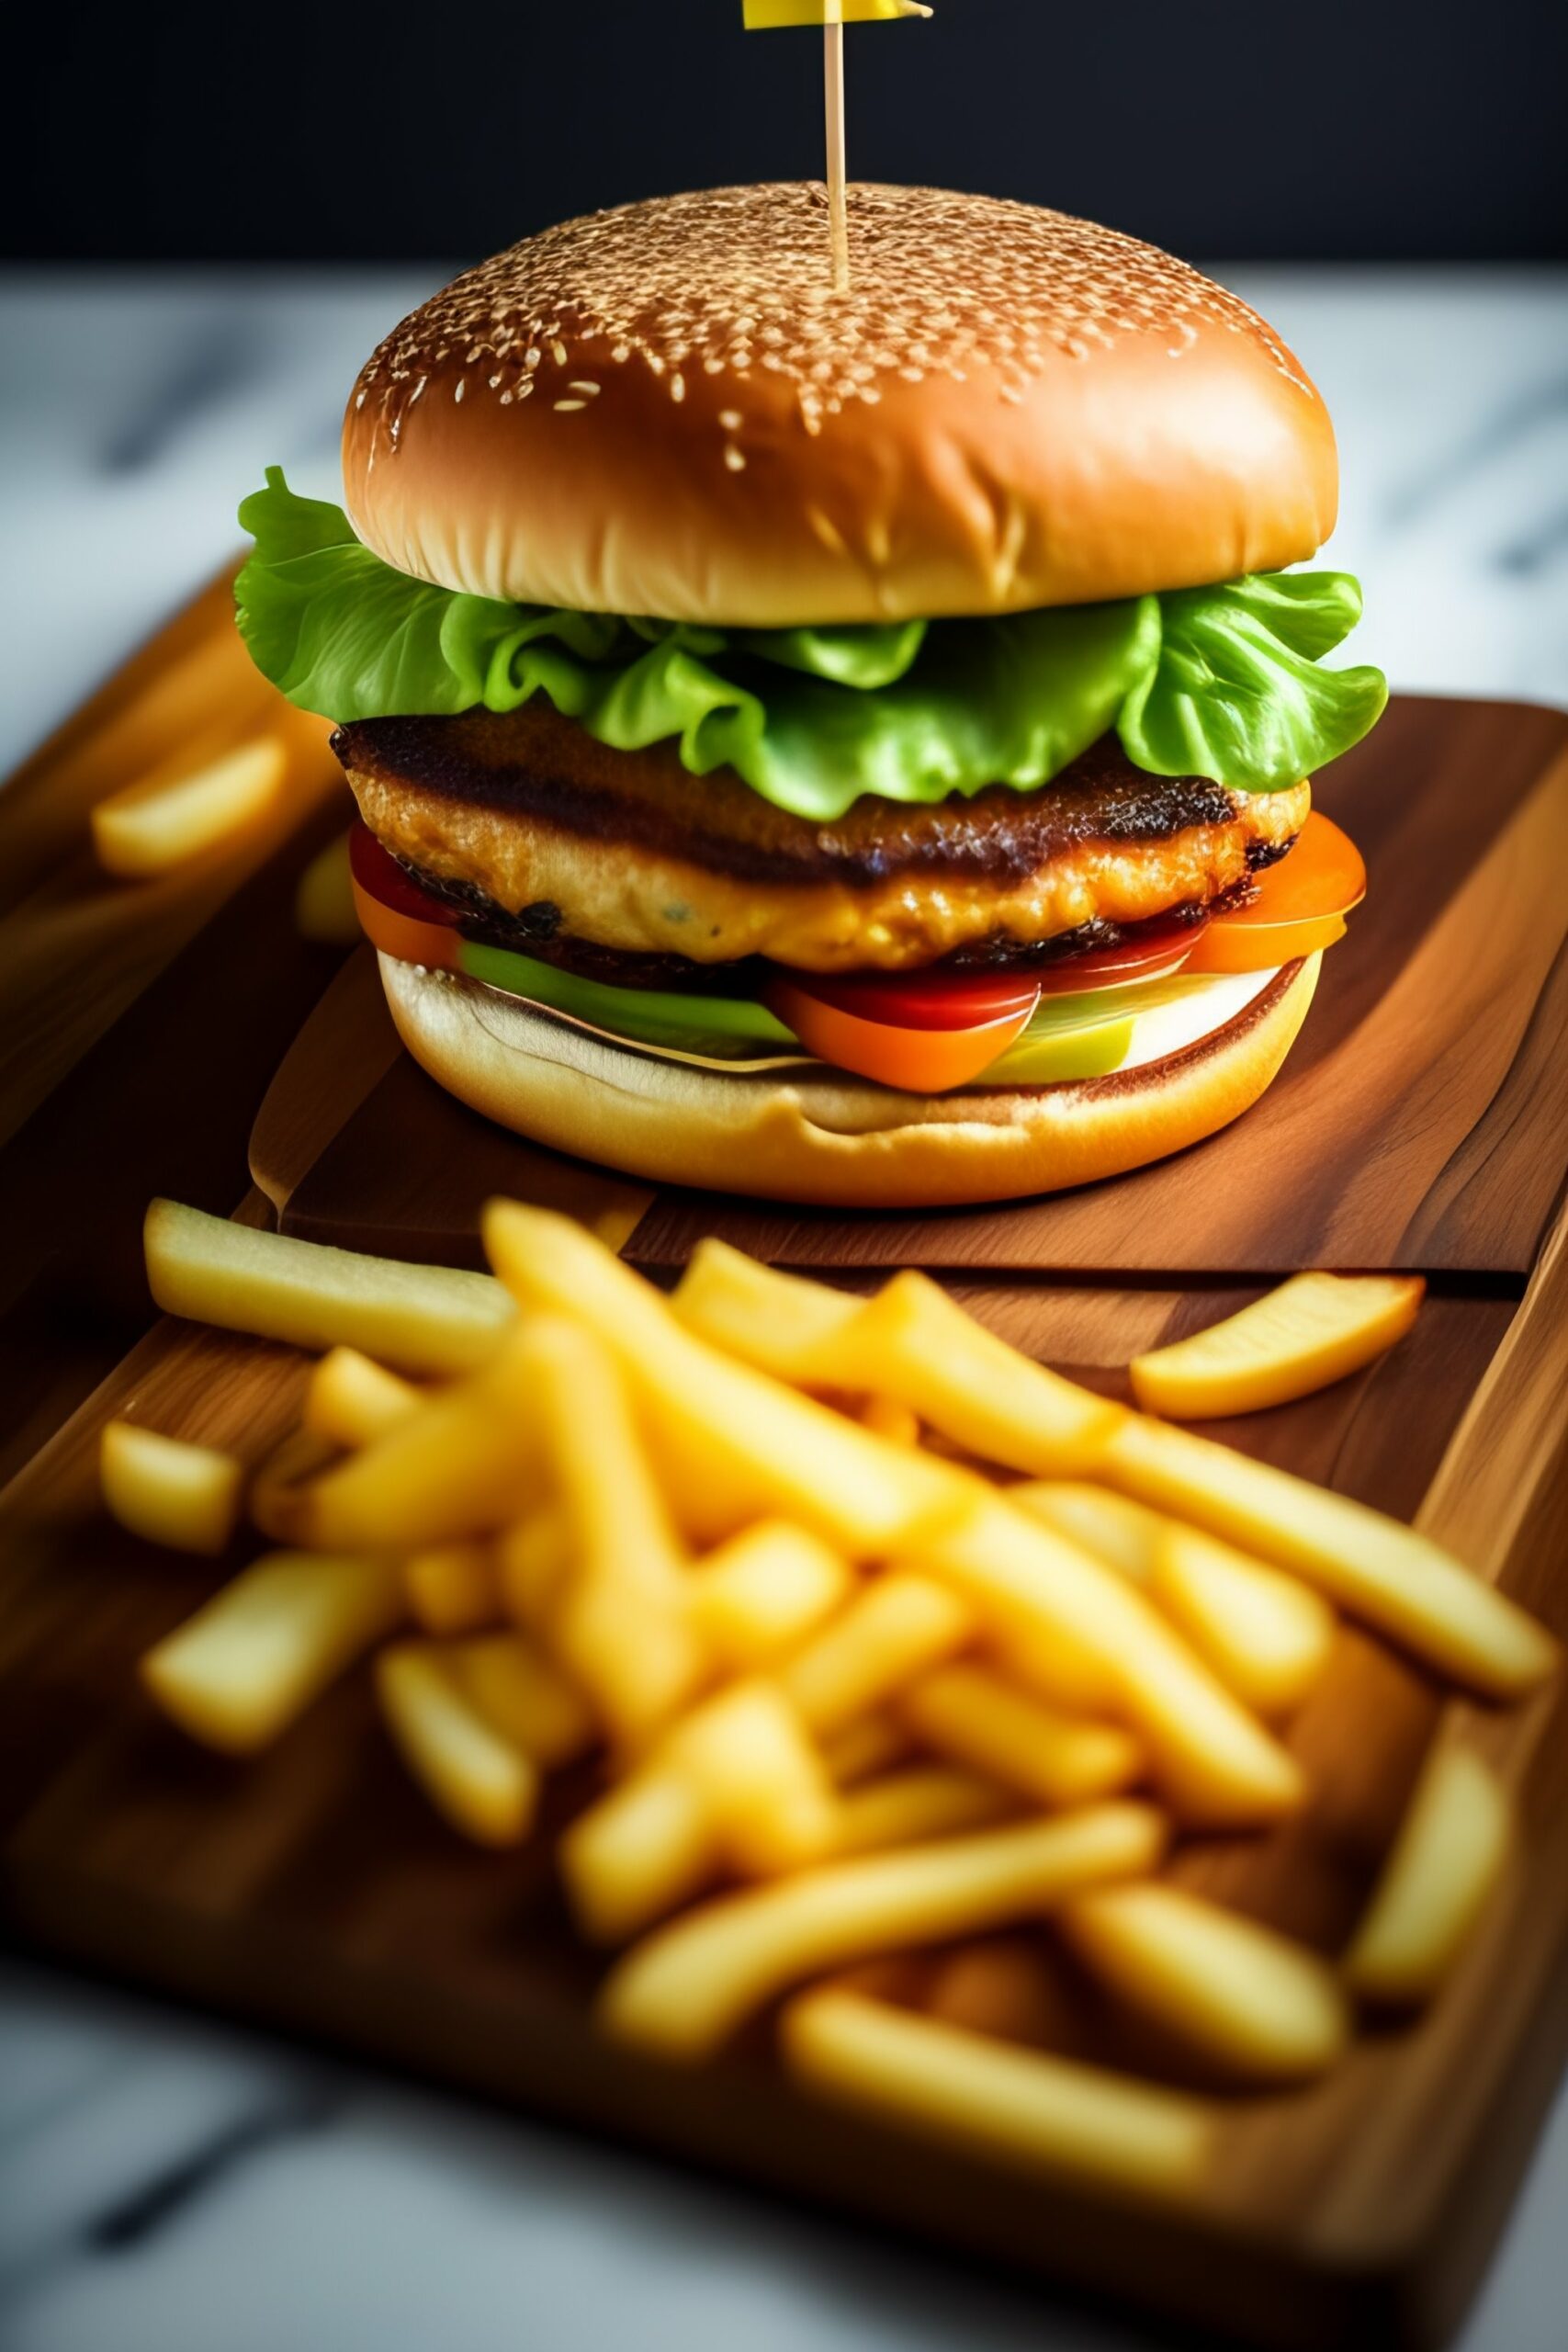 Health Balanced The Unintended Consequences of Fast Food